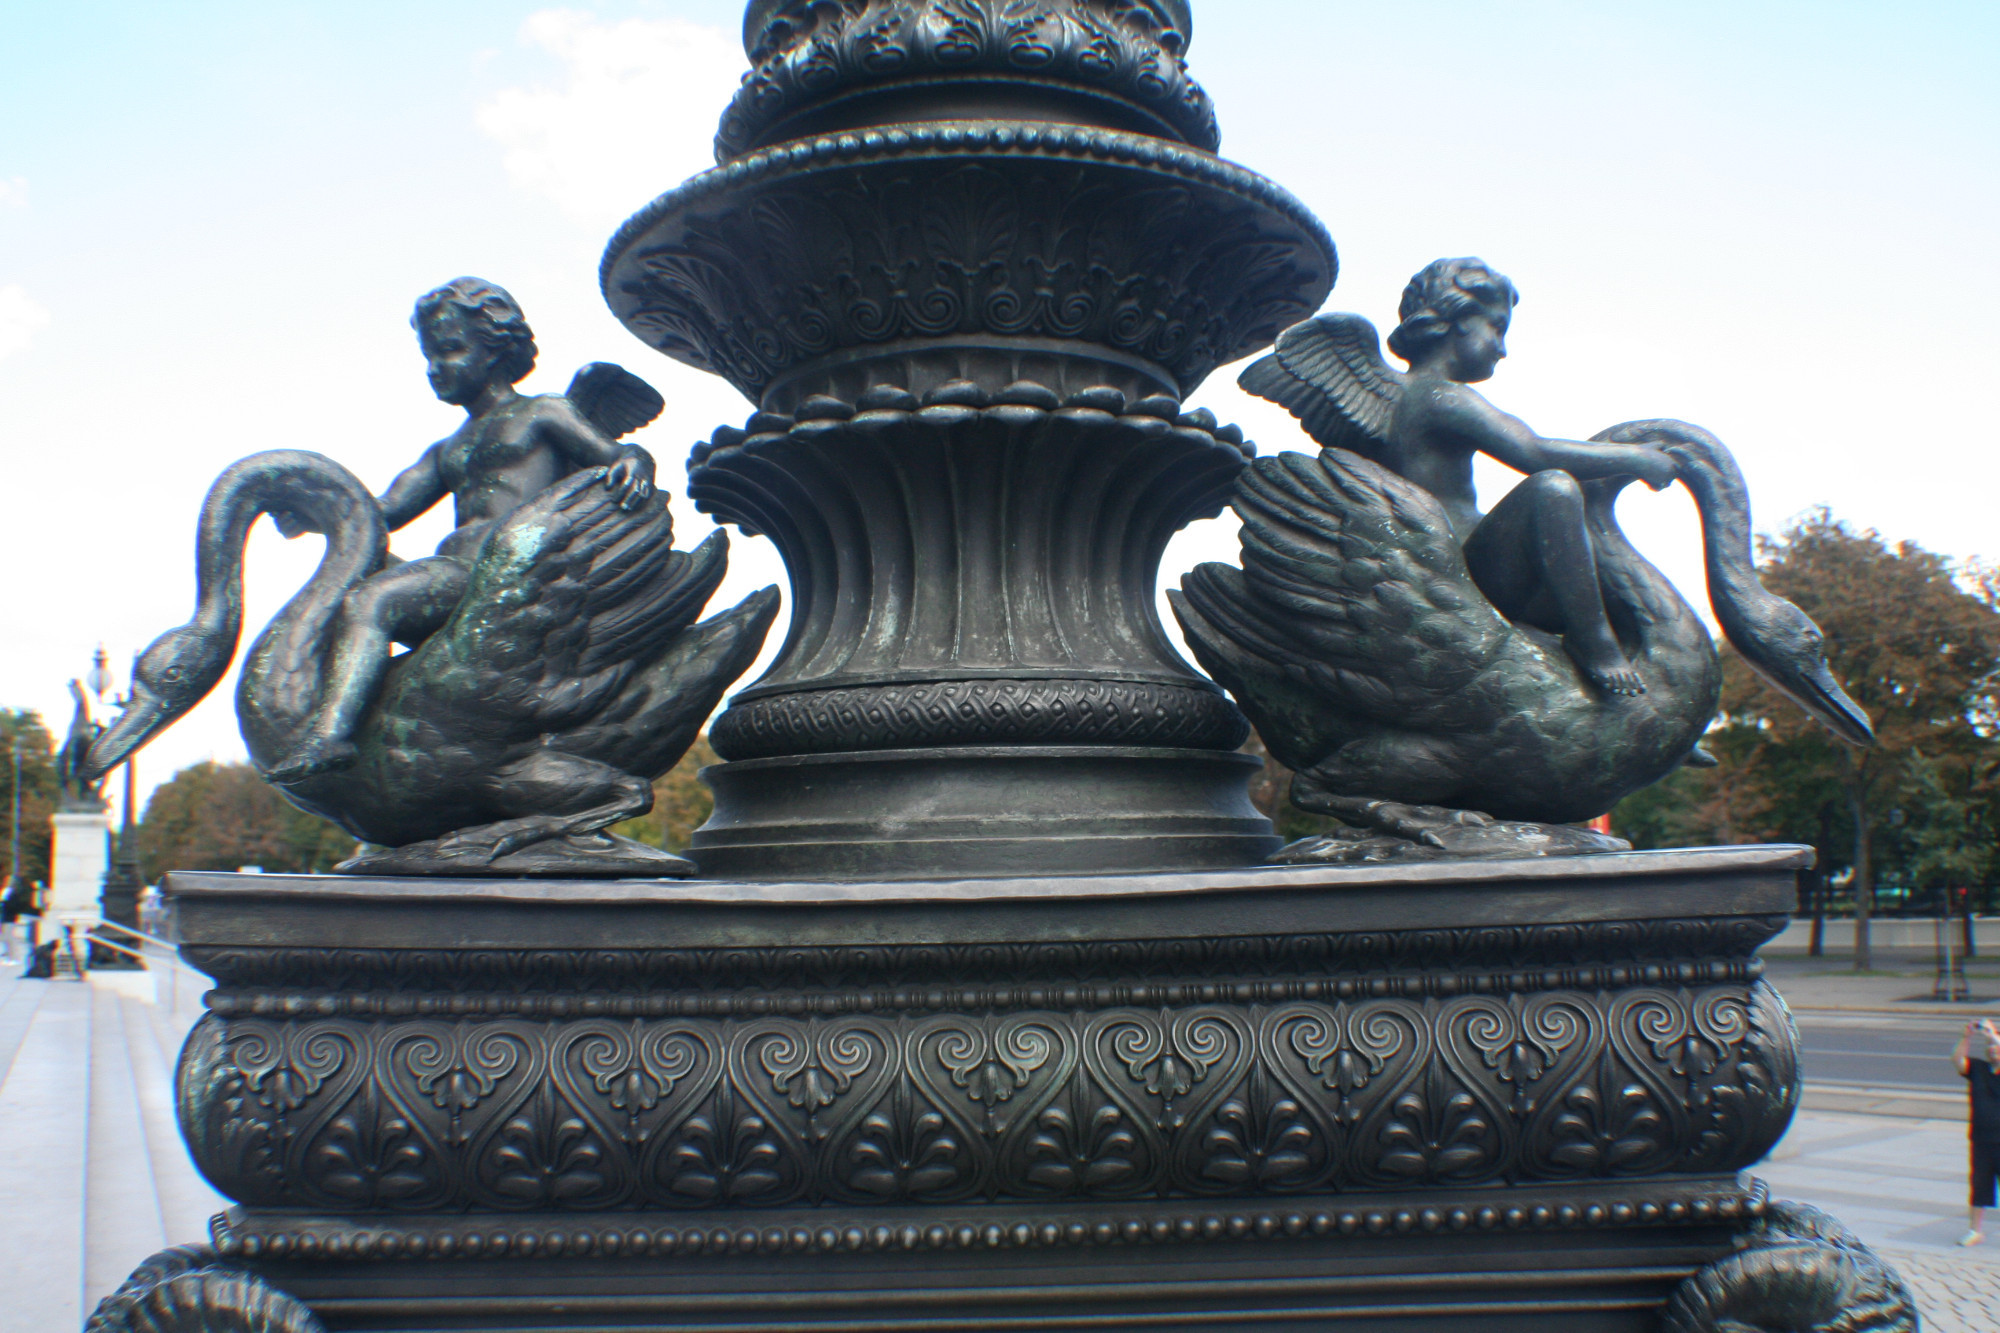 A lamppost decorated with swan and cherub sculptures outside Parliament <br/>
